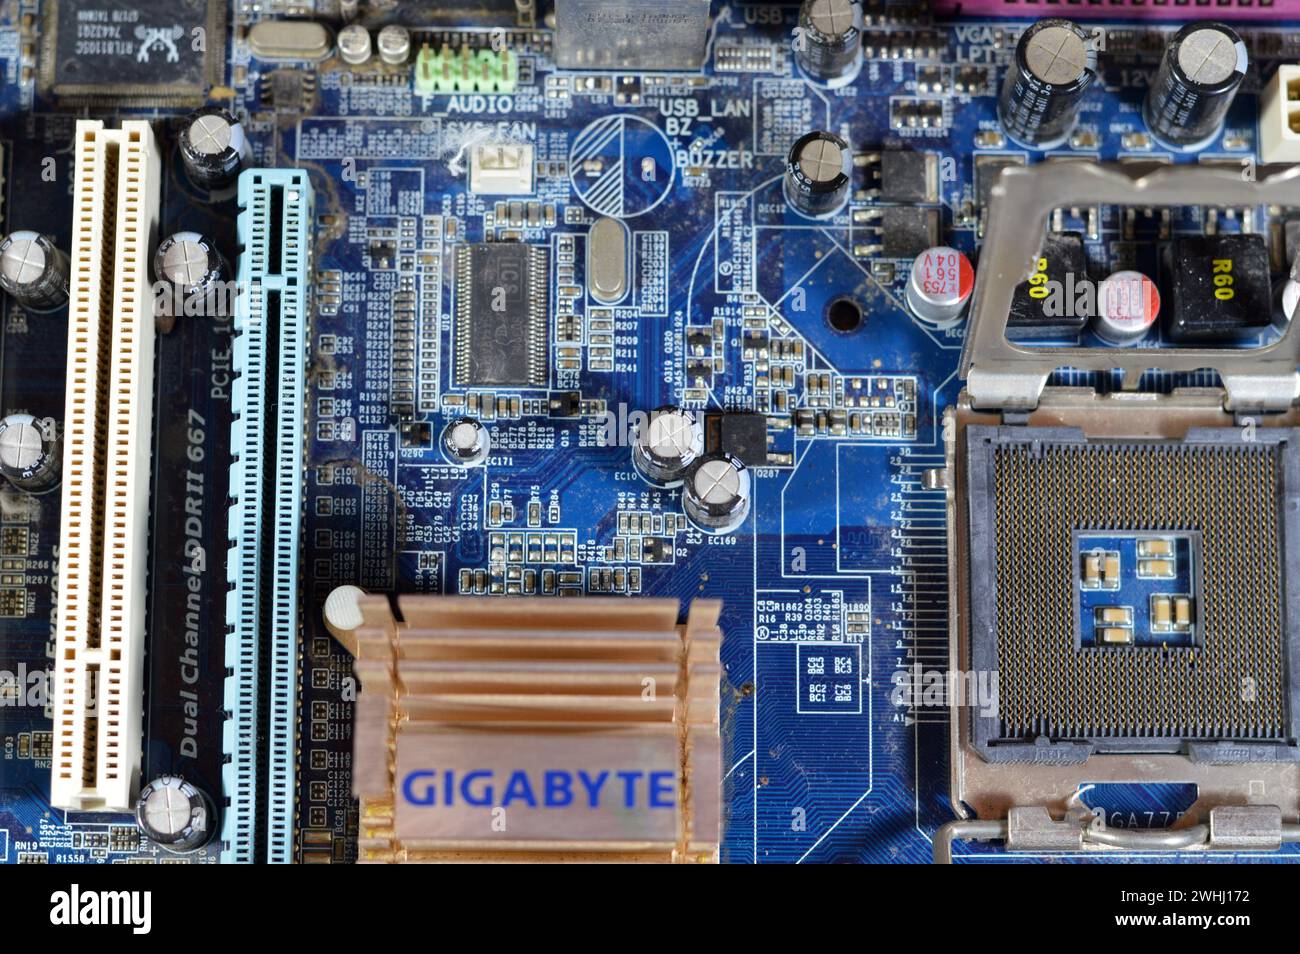 Cairo, Egypt, February 9 2024: Gigabyte main board computer motherboard FSB 1066 supports Core 2 Duo processor, Gigabyte is a Taiwanese manufacturer a Stock Photo